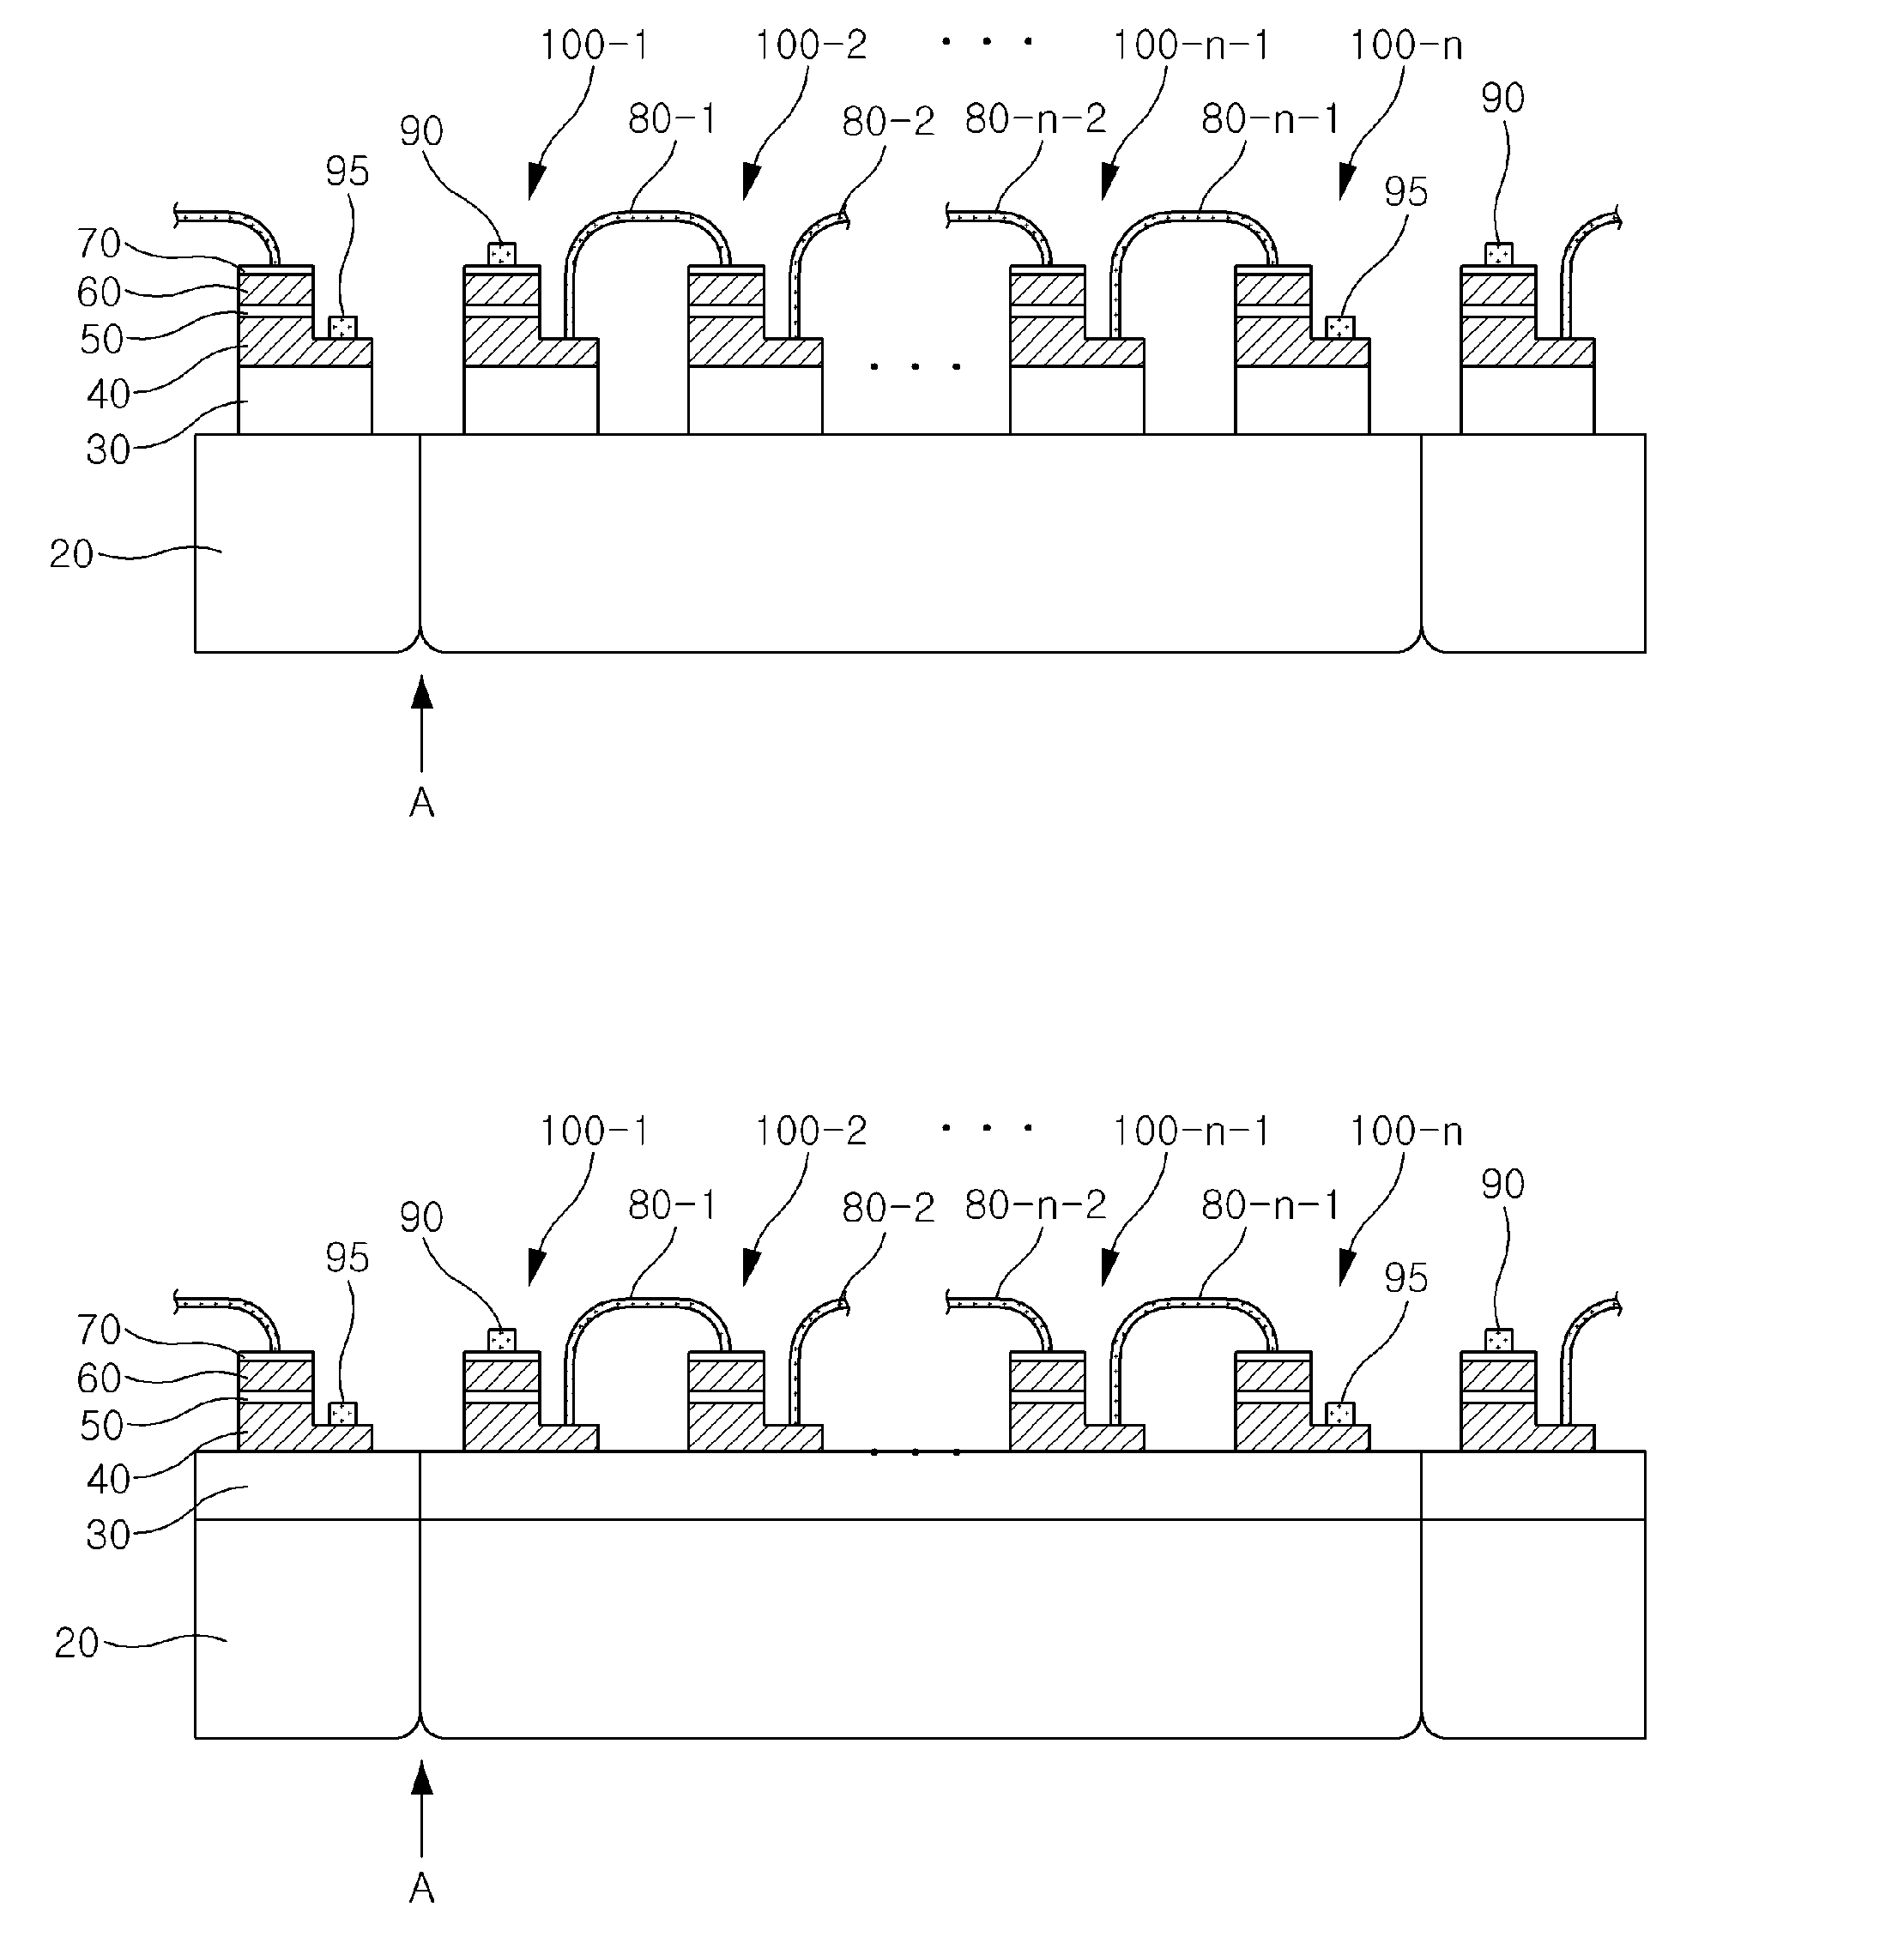 Light Emitting Element With A Plurality Of Cells Bonded, Method Of Manufacturing The Same, And Light Emitting Device Using The Same